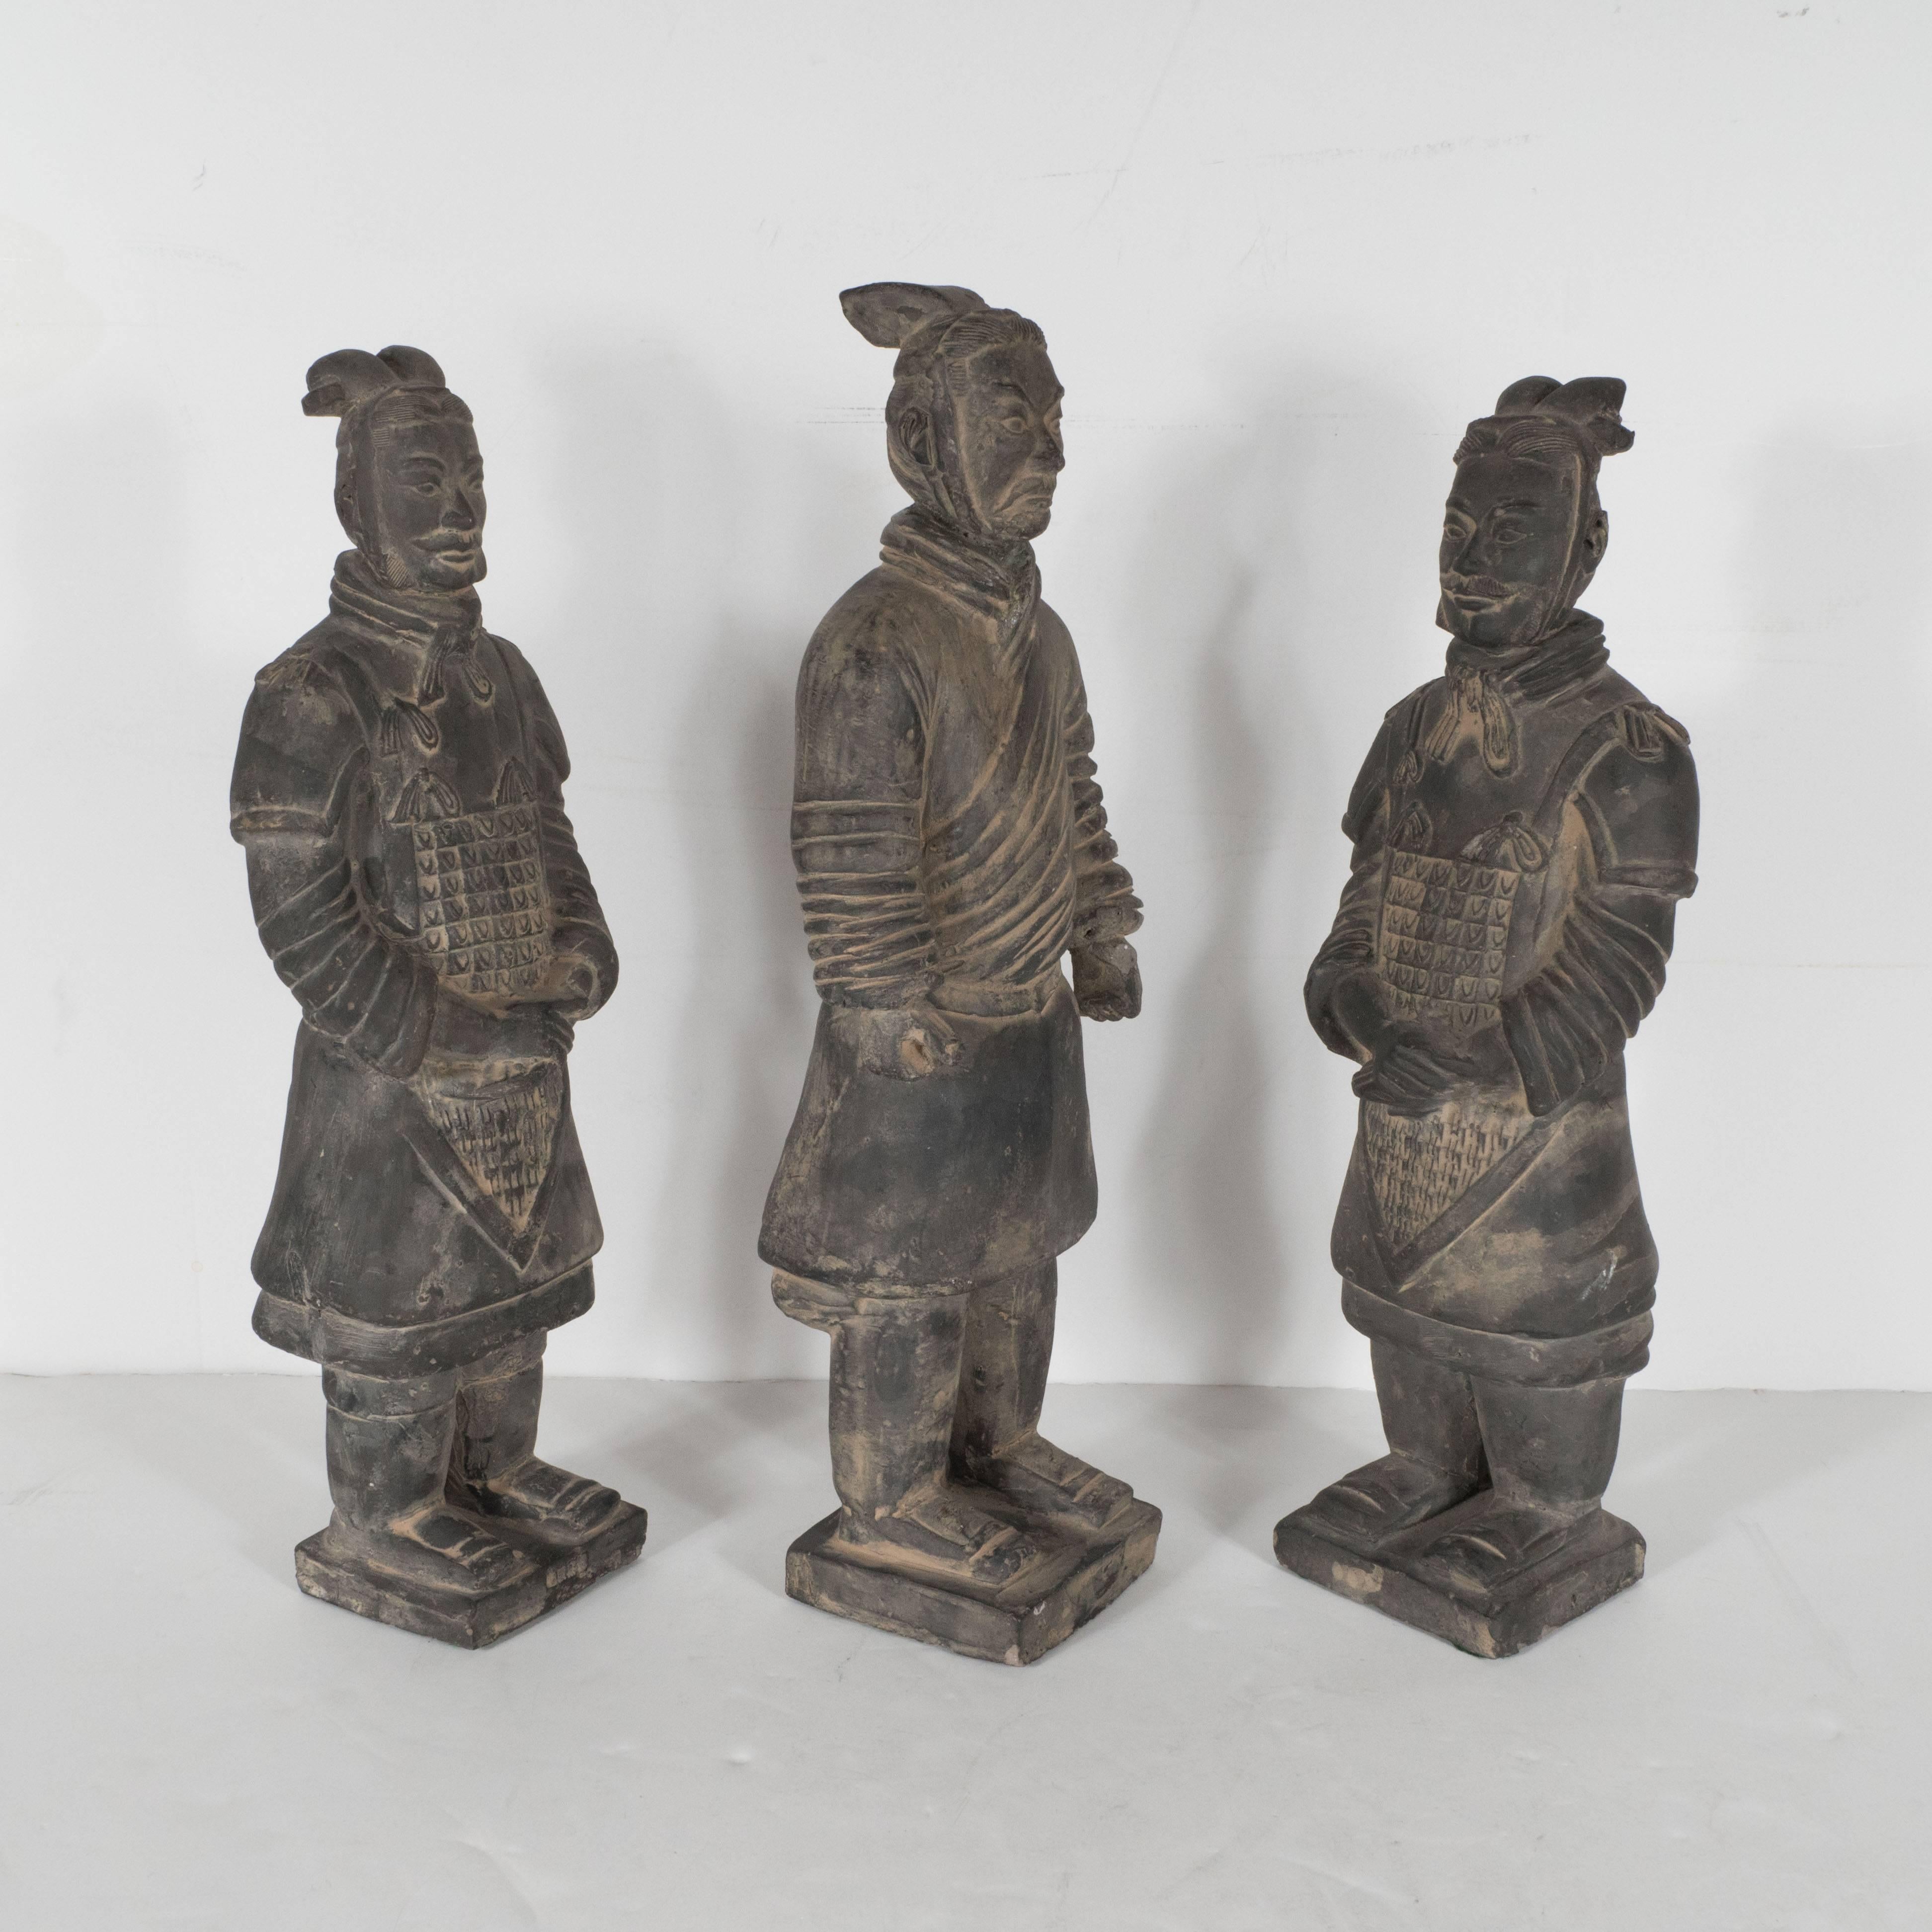 This set of three terracotta burial soldiers represent impeccable replicas of the original figurines from Qin Shi Huang's (the first Emperor of China) from roughly 200 B.C. Discovered in 1974 by farmers in Lintong District, Xi'an, Shaanxi province,